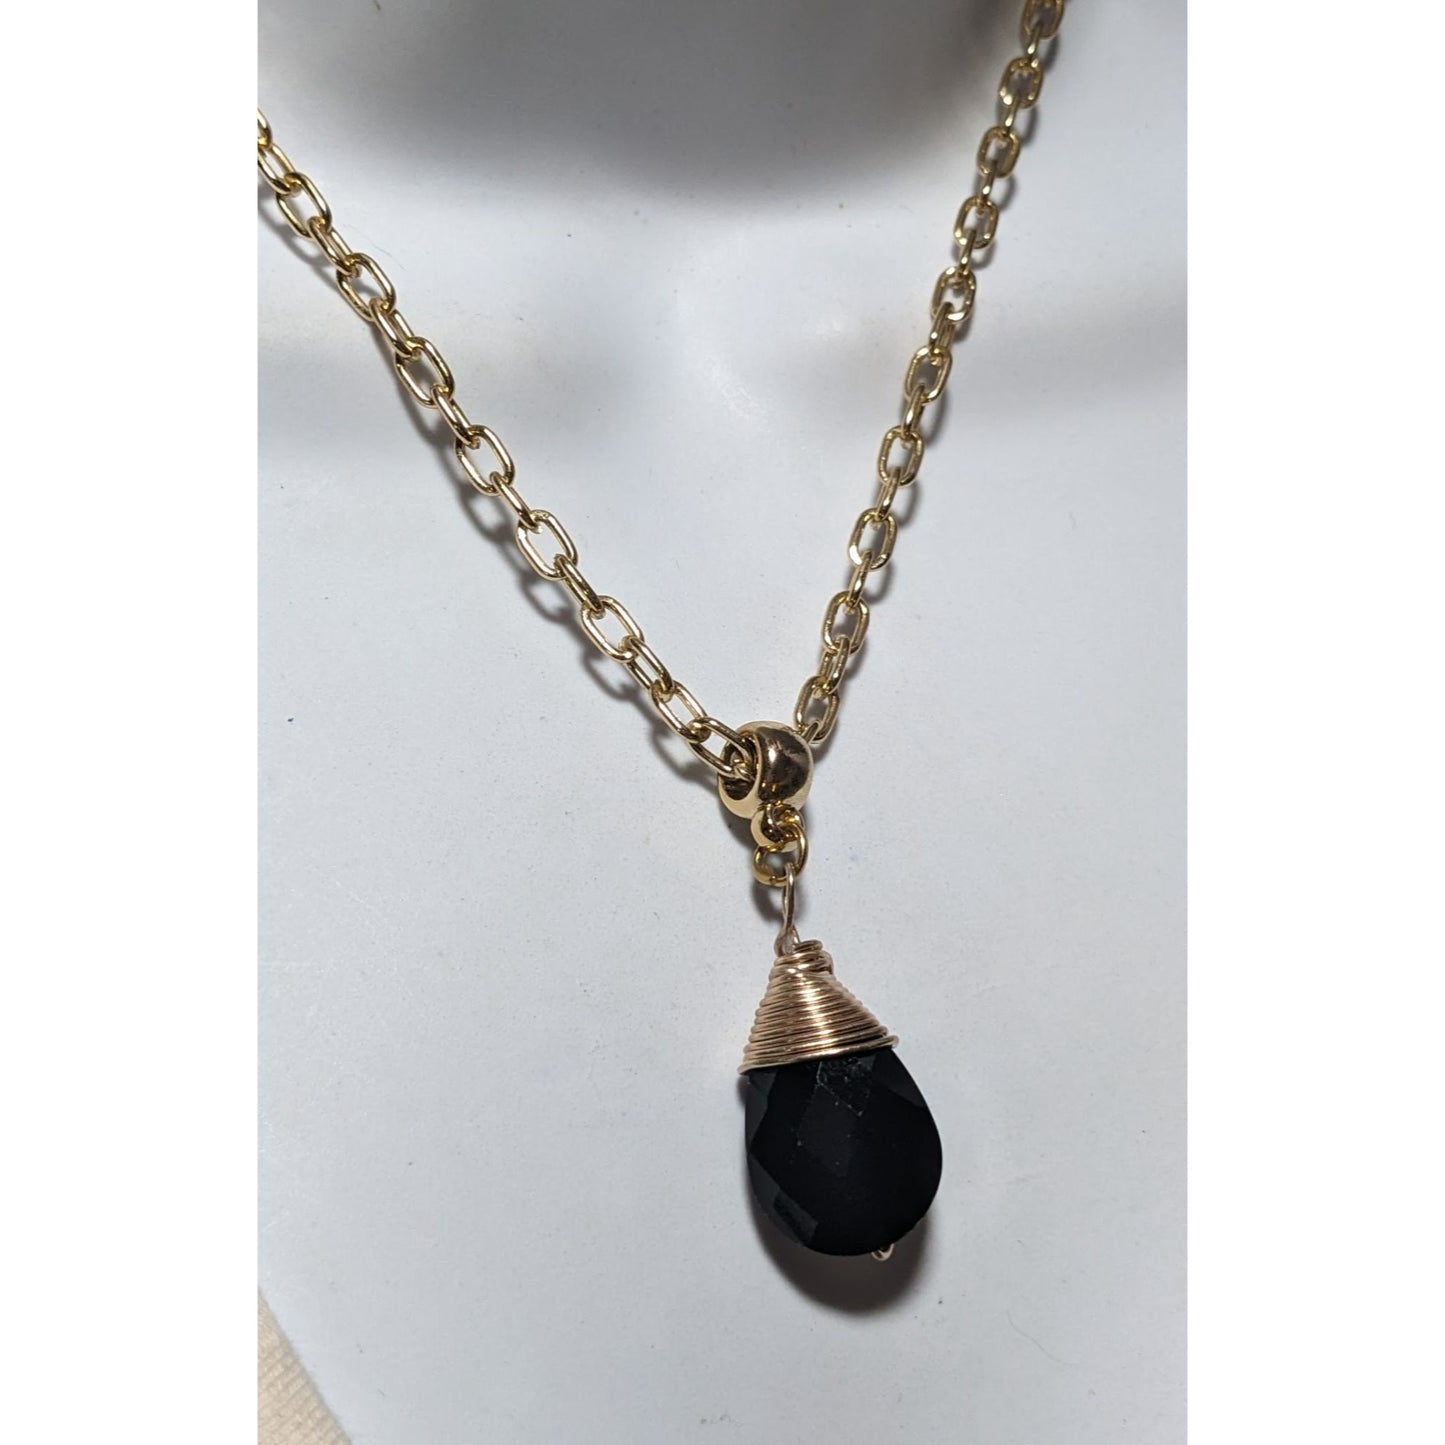 Glam Goth Black And Gold Glass Pendant Necklace